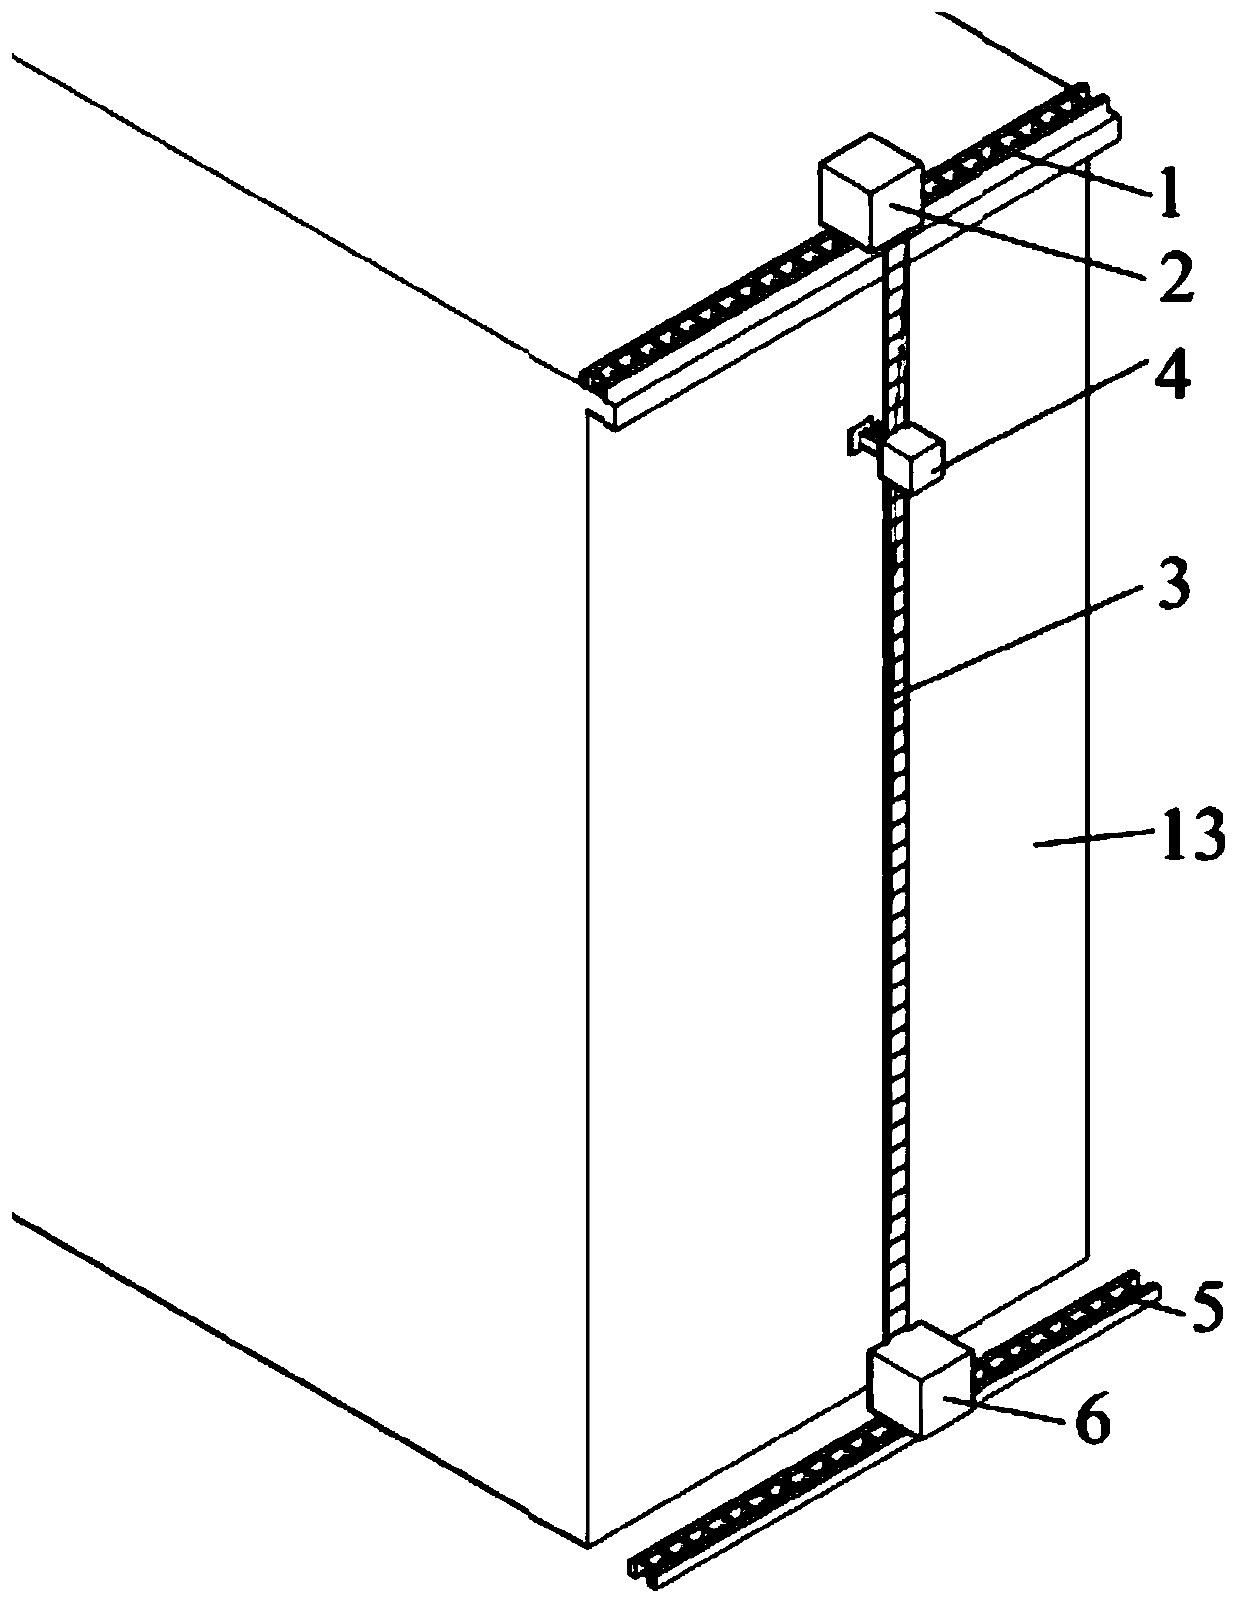 Automatic wall-climbing type outer wall detection system and detection method thereof